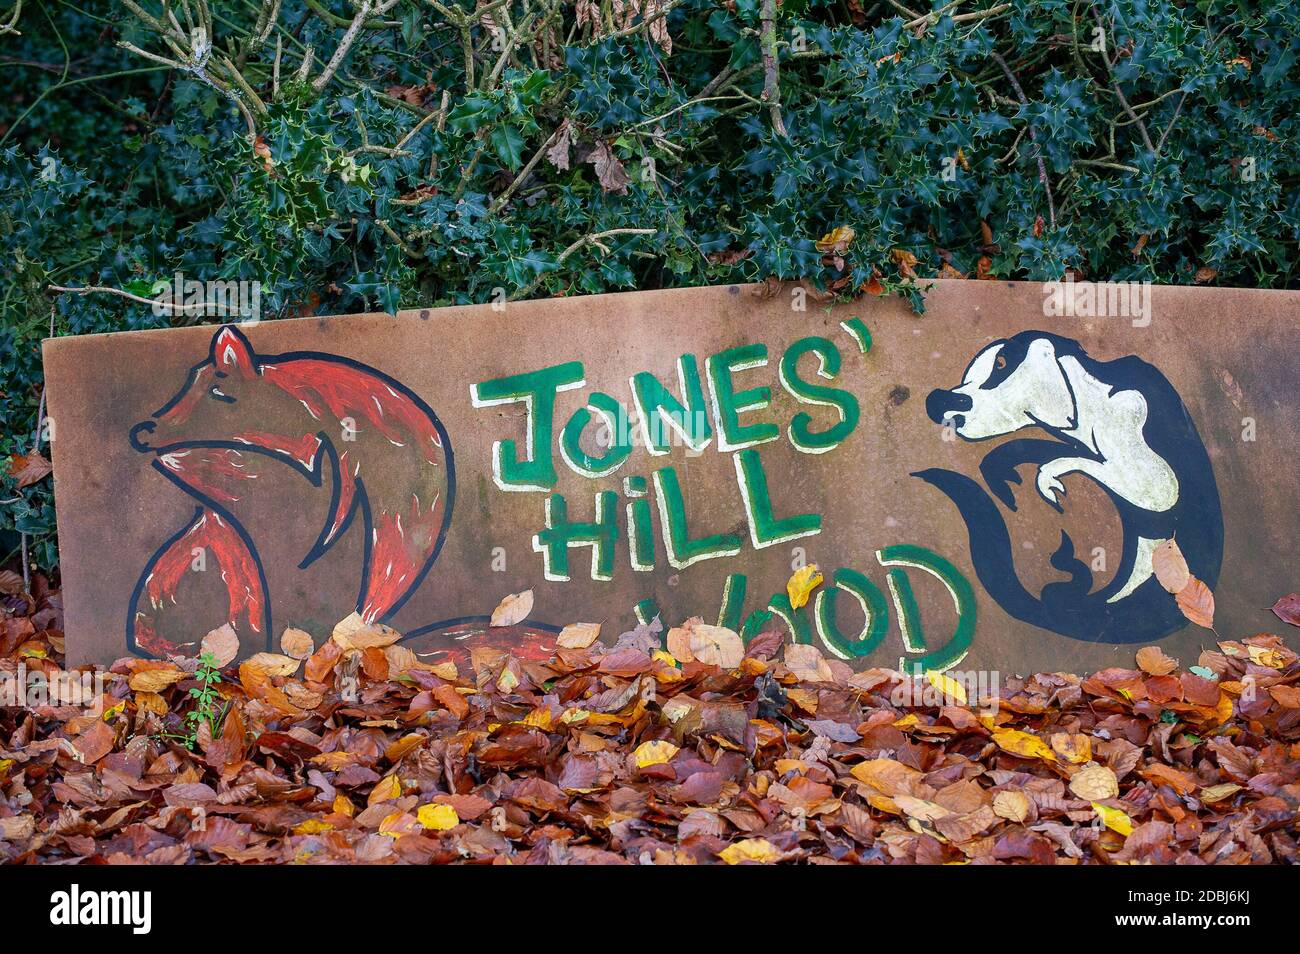 Aylesbury Vale, Buckinghamshire, UK. 17th November, 2020. Autumn leaves fall on part of Jones Hill Wood possibly for the last time. The Woodland Trust have issued a press release asking for an immediate pause on work at the wood to said that they have “grave concerns” that ancient woodland due for imminent destruction by HS2 Ltd might be felled without proper survey work to identify bat roosts, and without the proper licences required by law. Credit: Maureen McLean/Alamy Live News Stock Photo